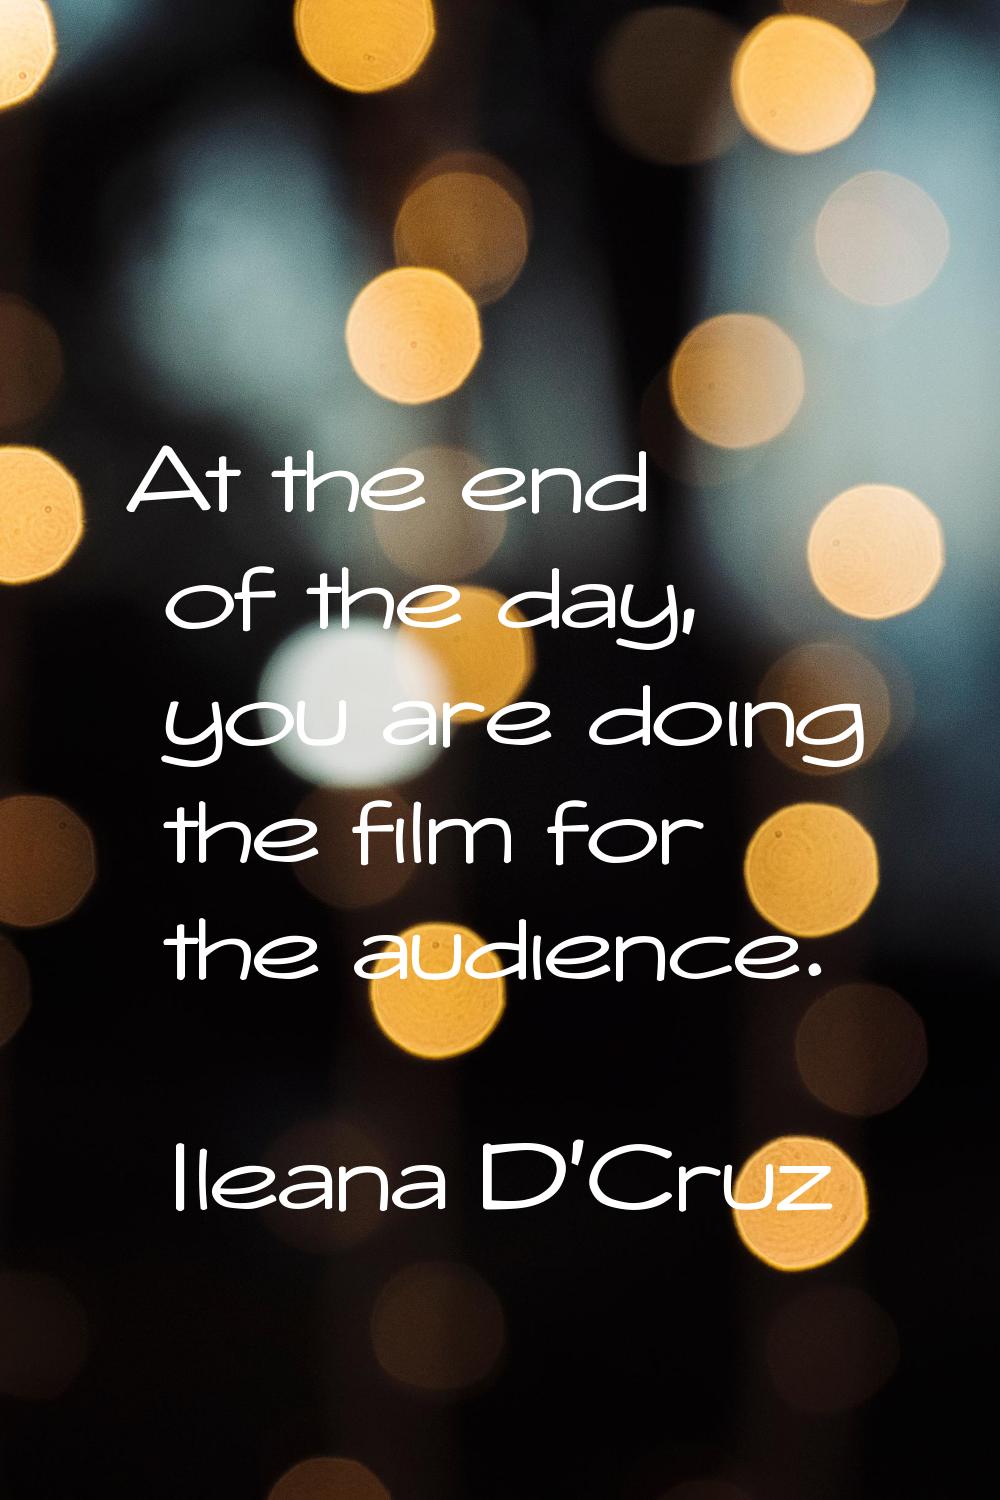 At the end of the day, you are doing the film for the audience.